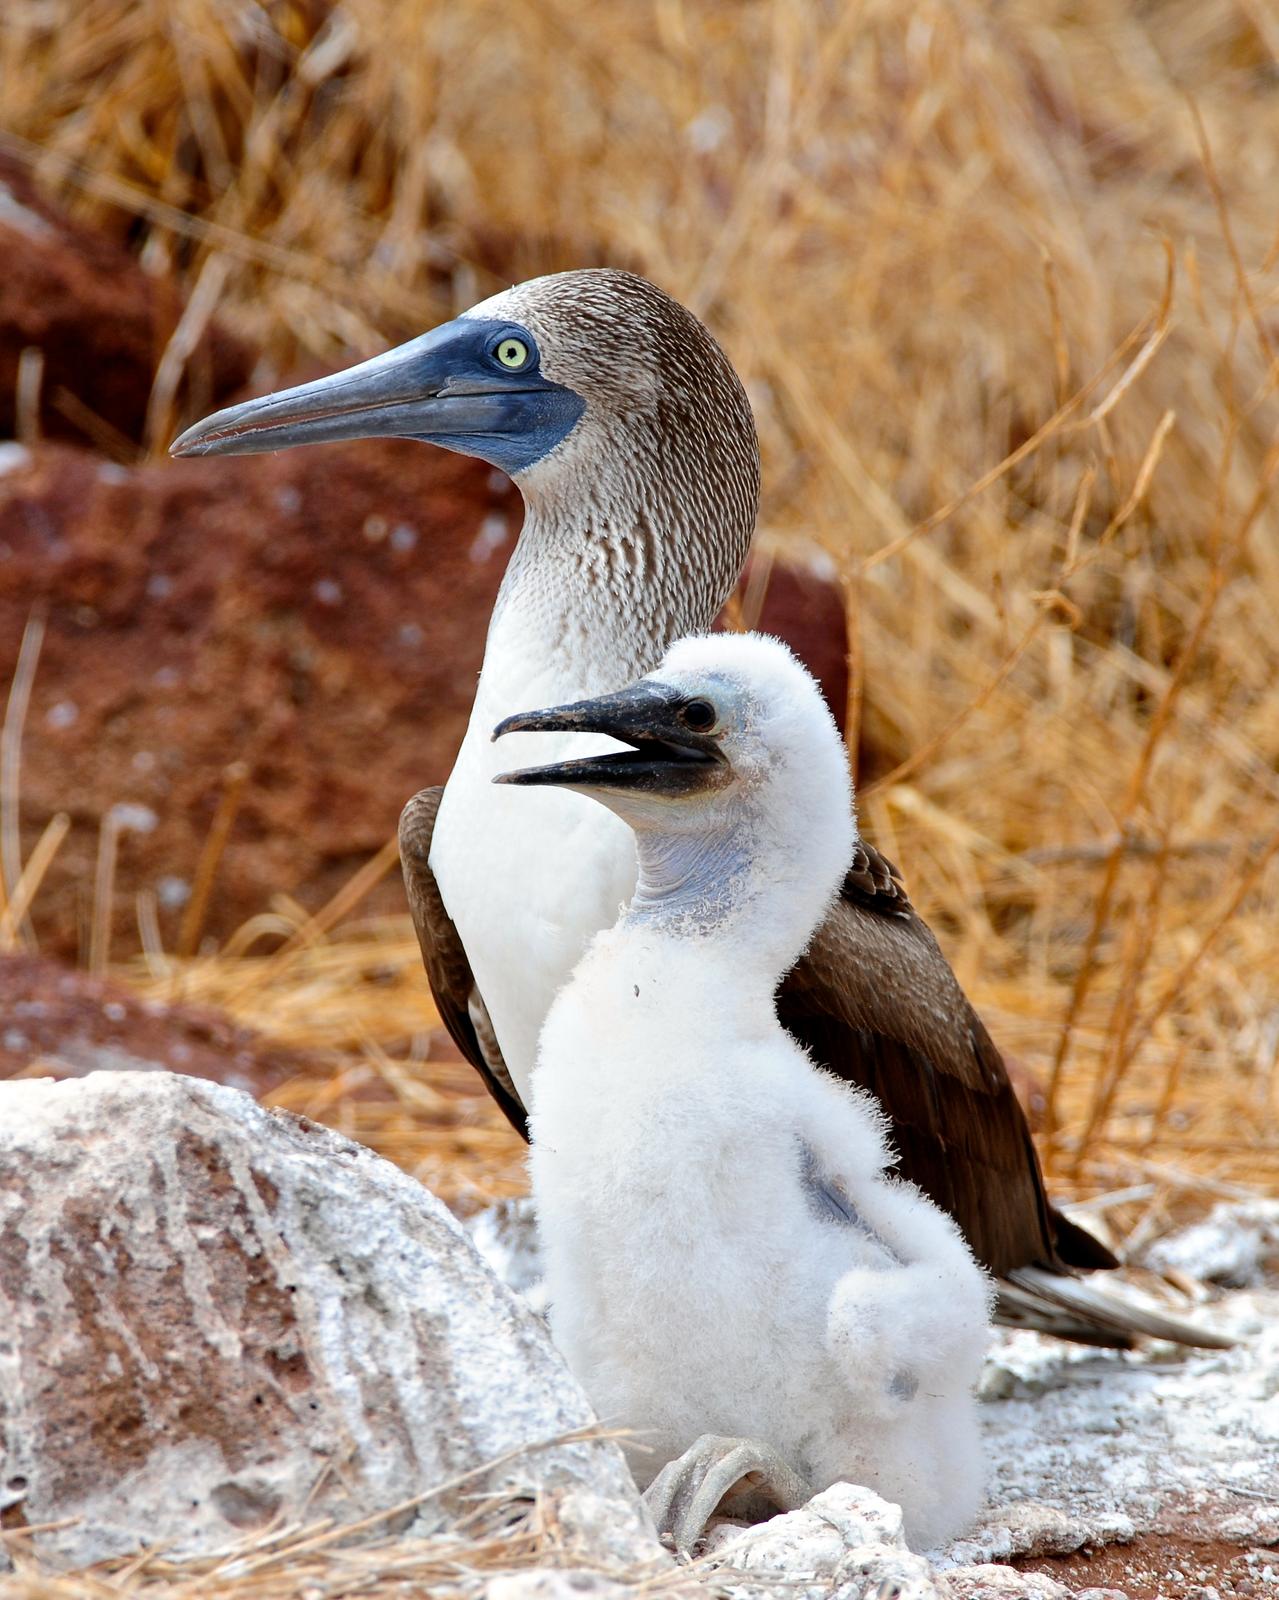 Blue-footed Booby Photo by Gerald Friesen